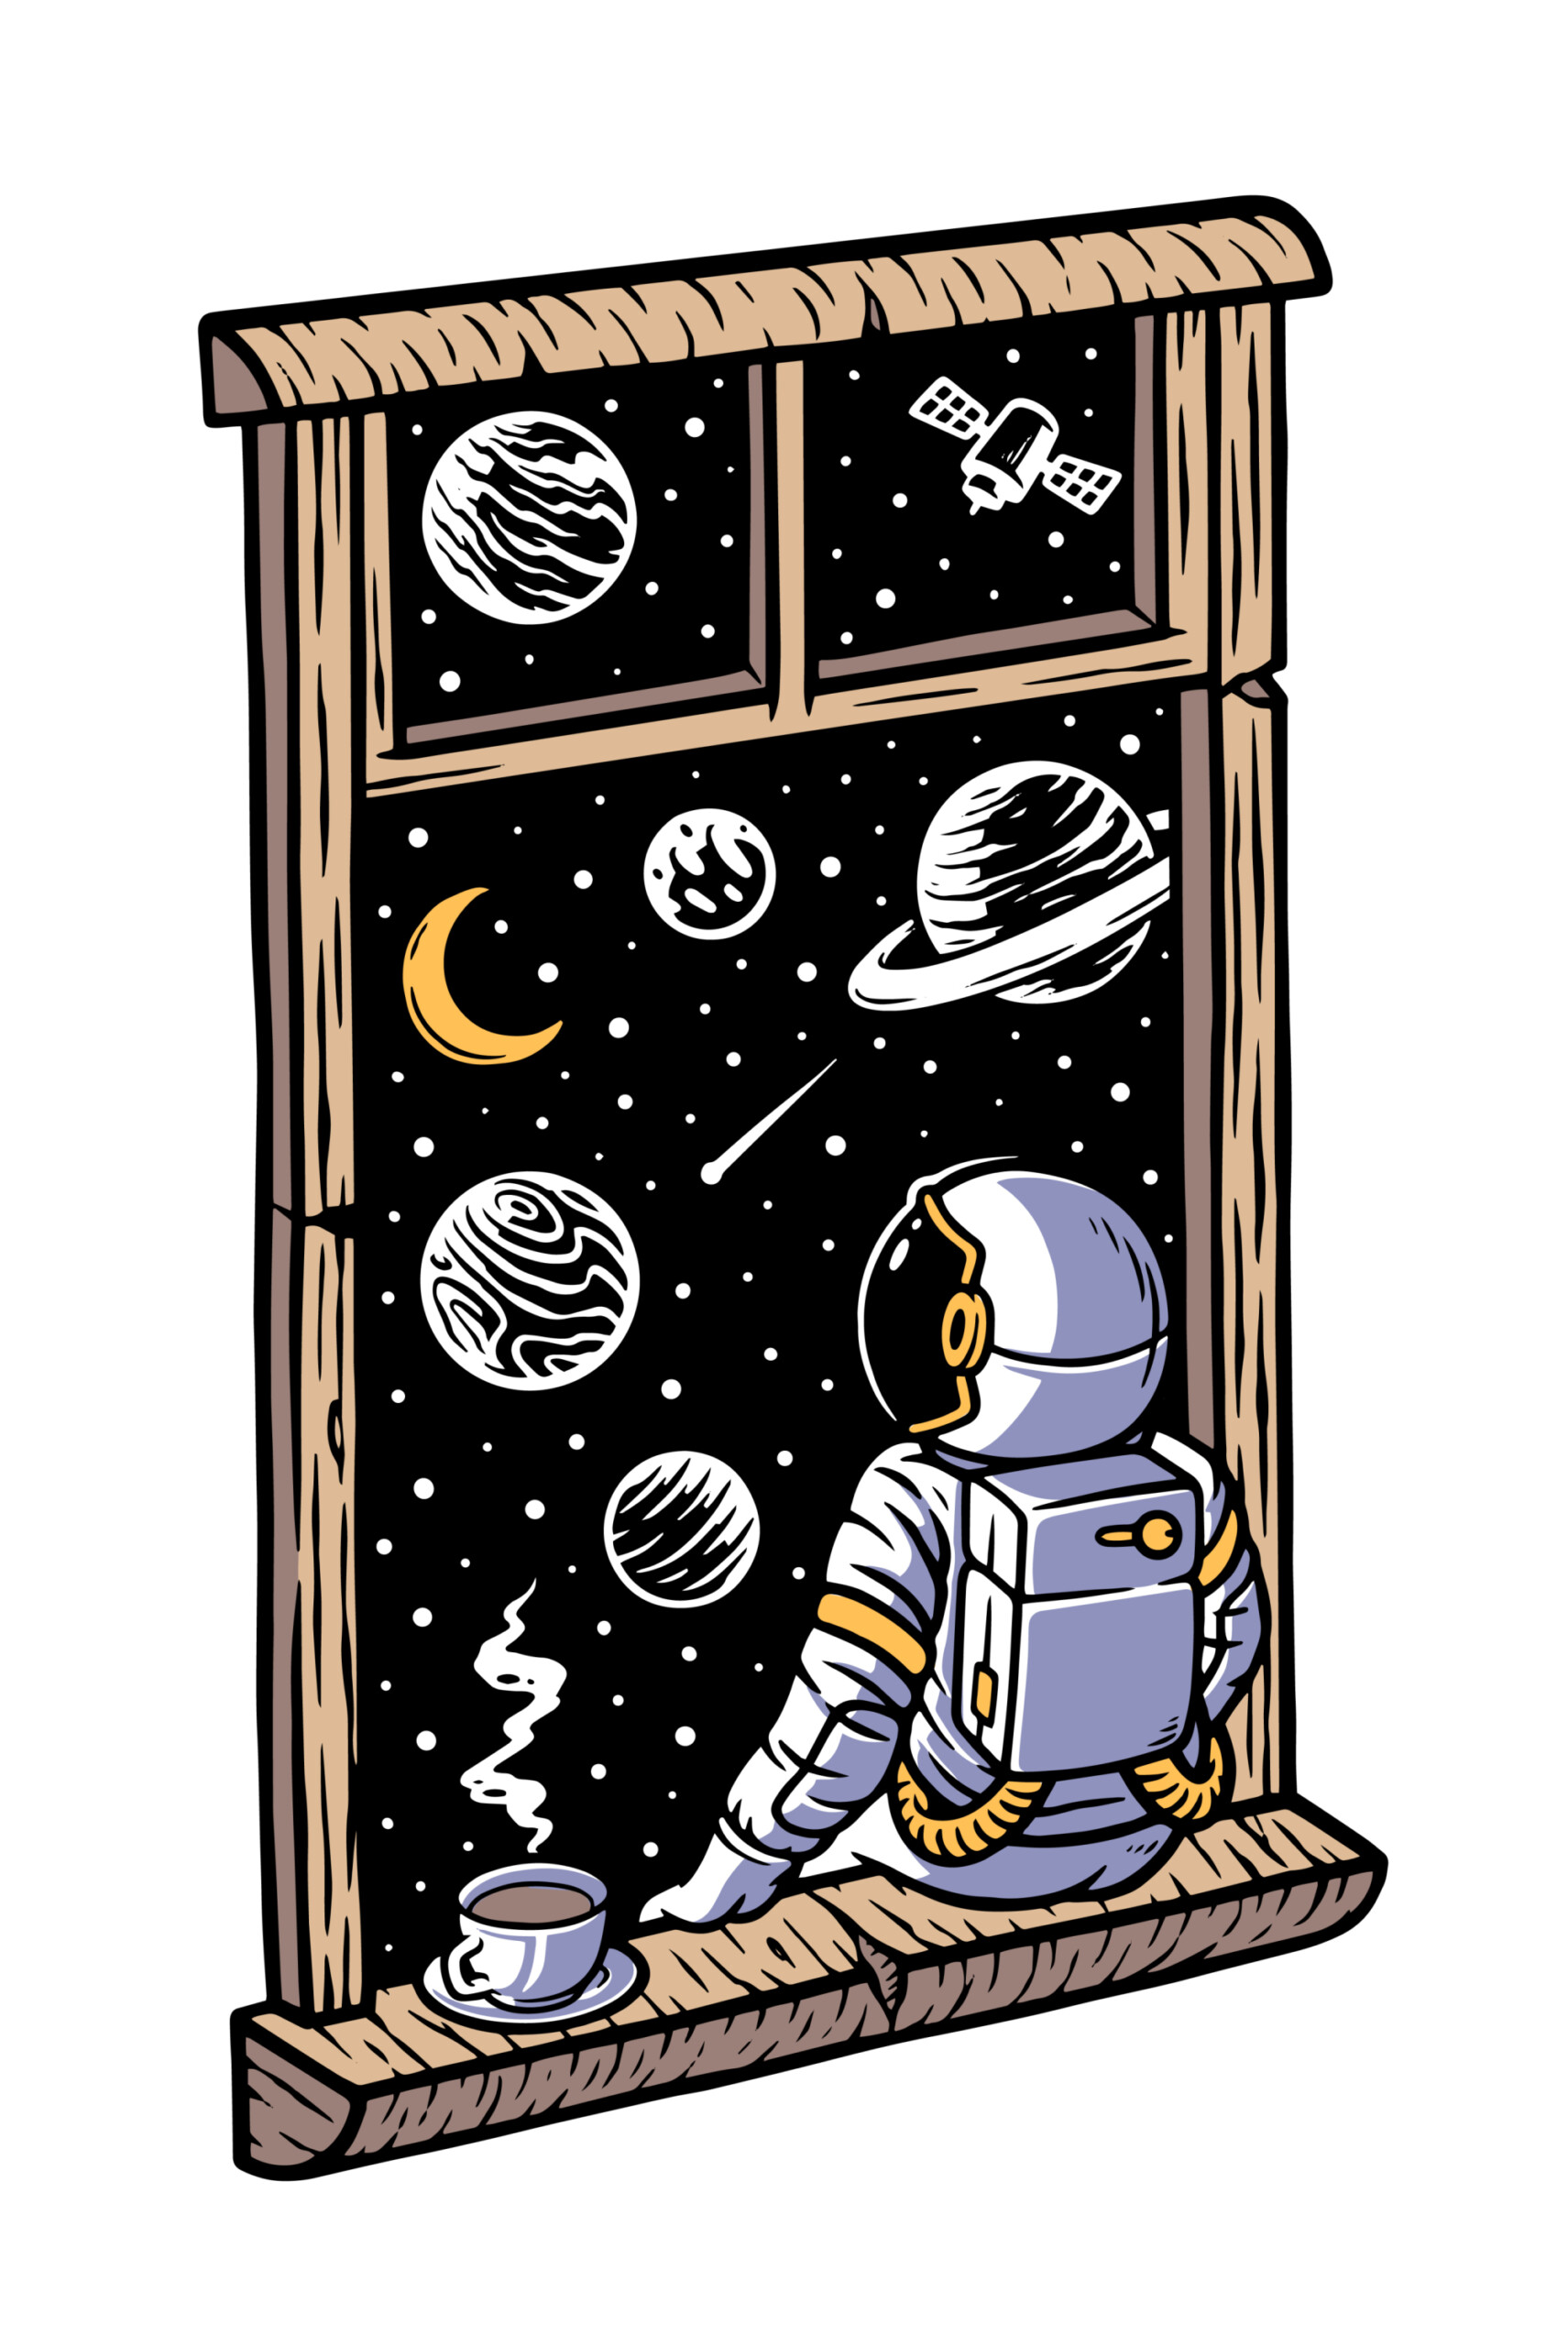 Astronaut Looks Out Of The Window - Original image